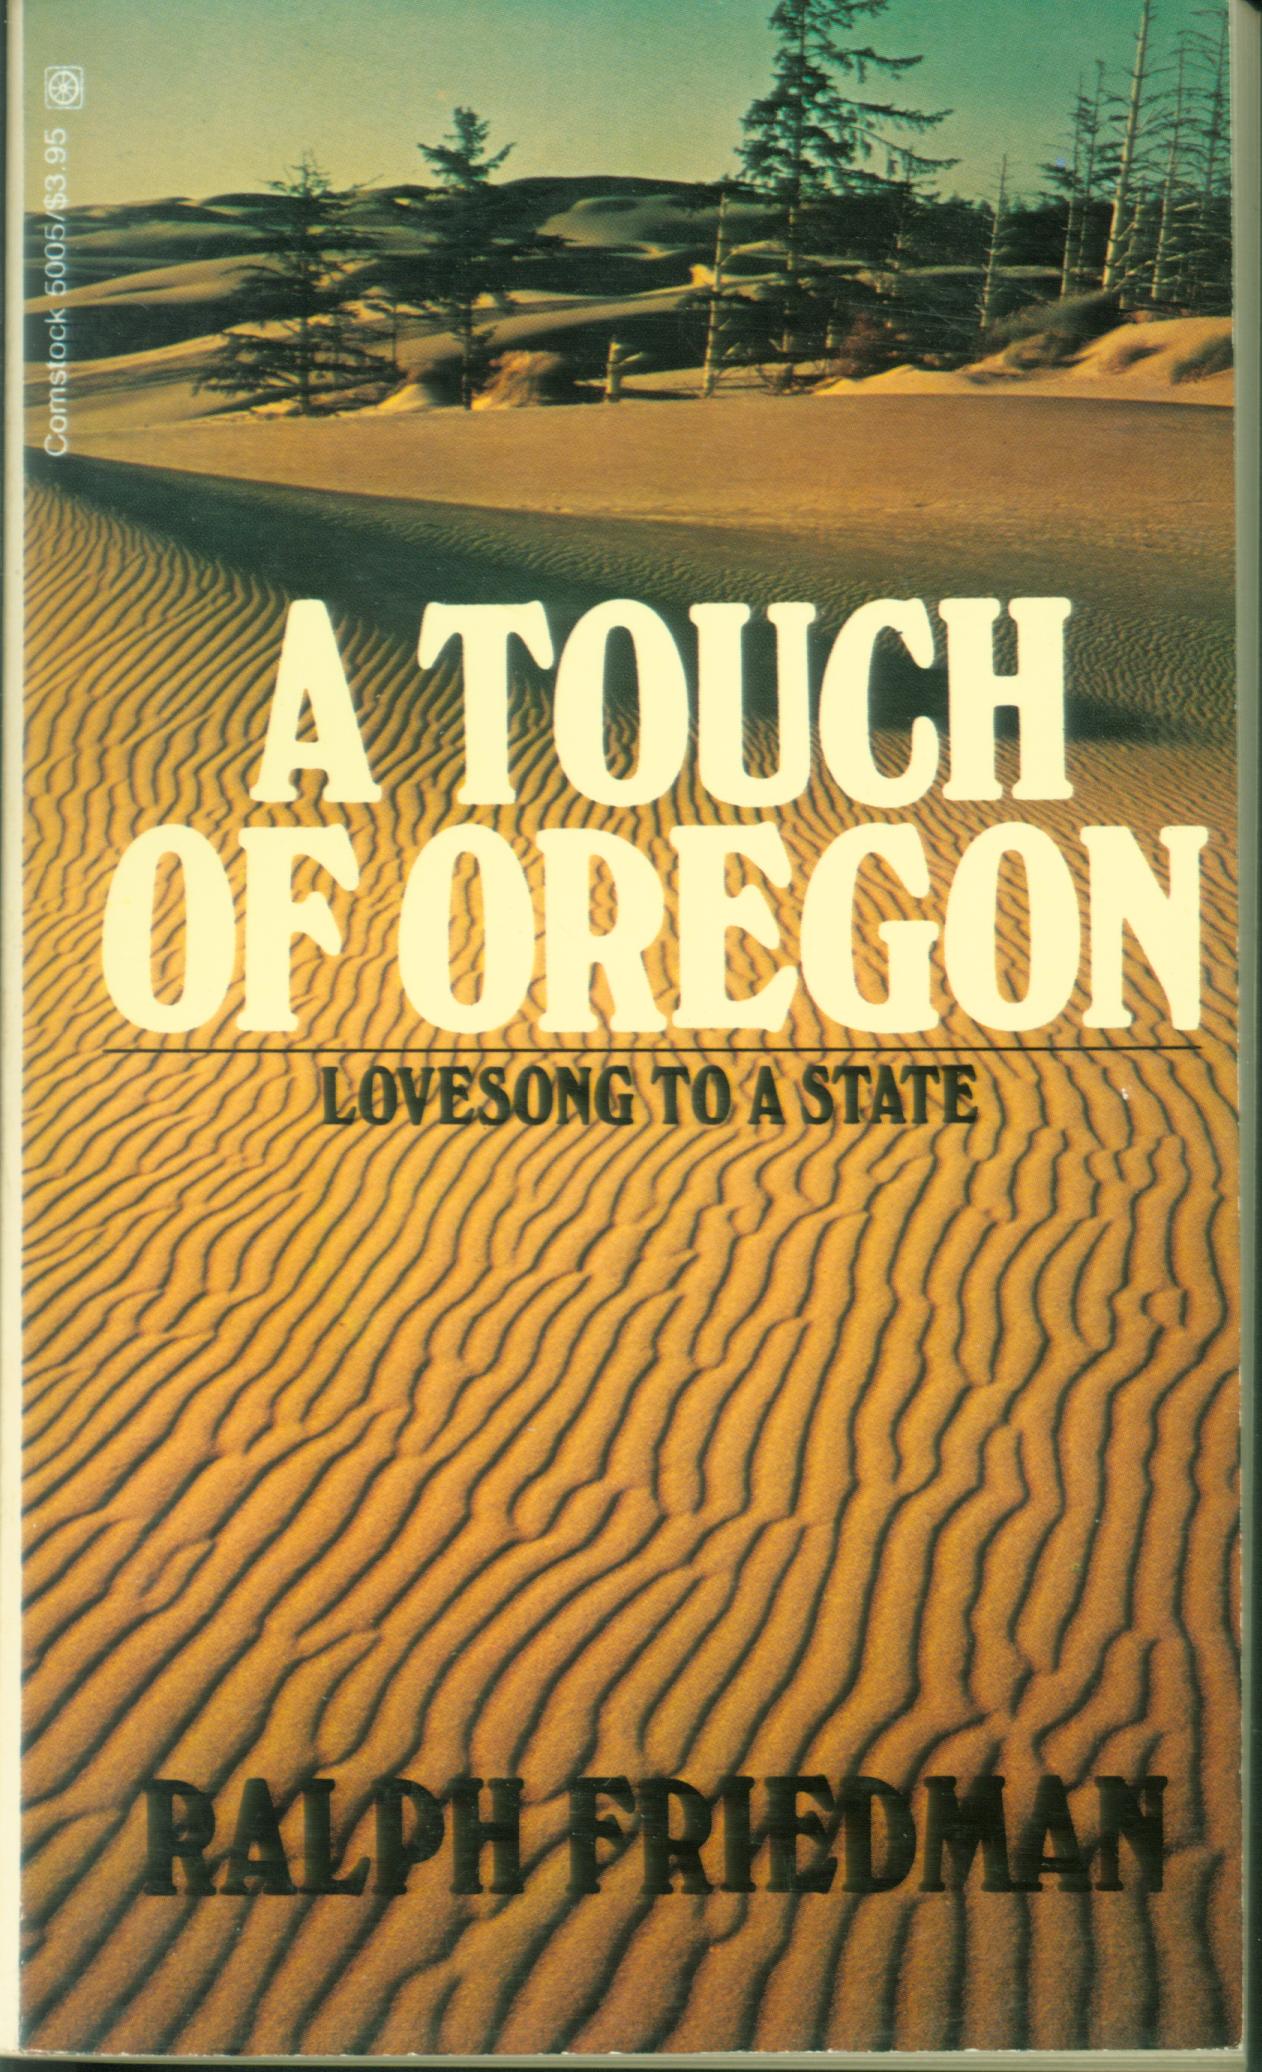 A TOUCH OF OREGON: lovesong to a state